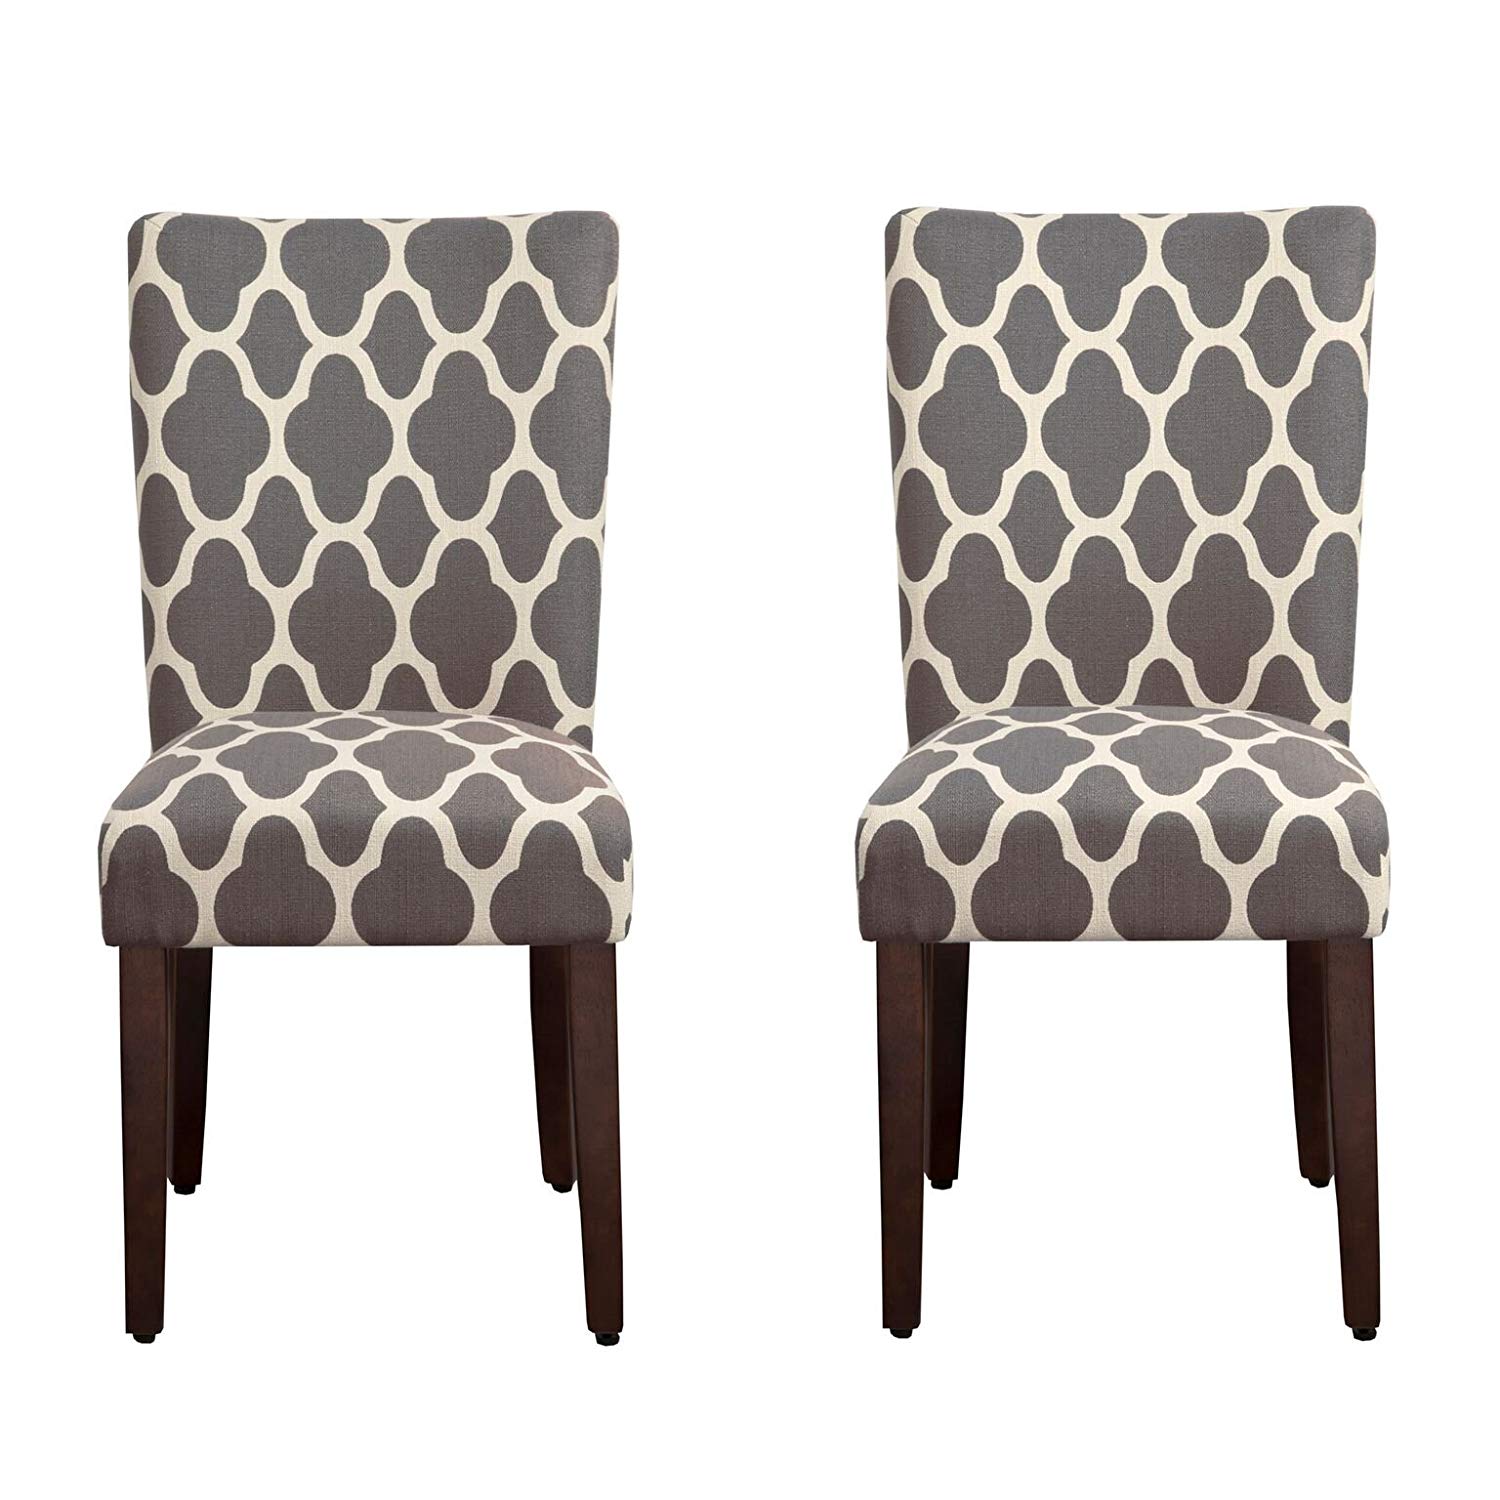 HomePop Parsons Classic Upholstered Accent Dining Chair, Set of 2, Grey and Cream Geometric